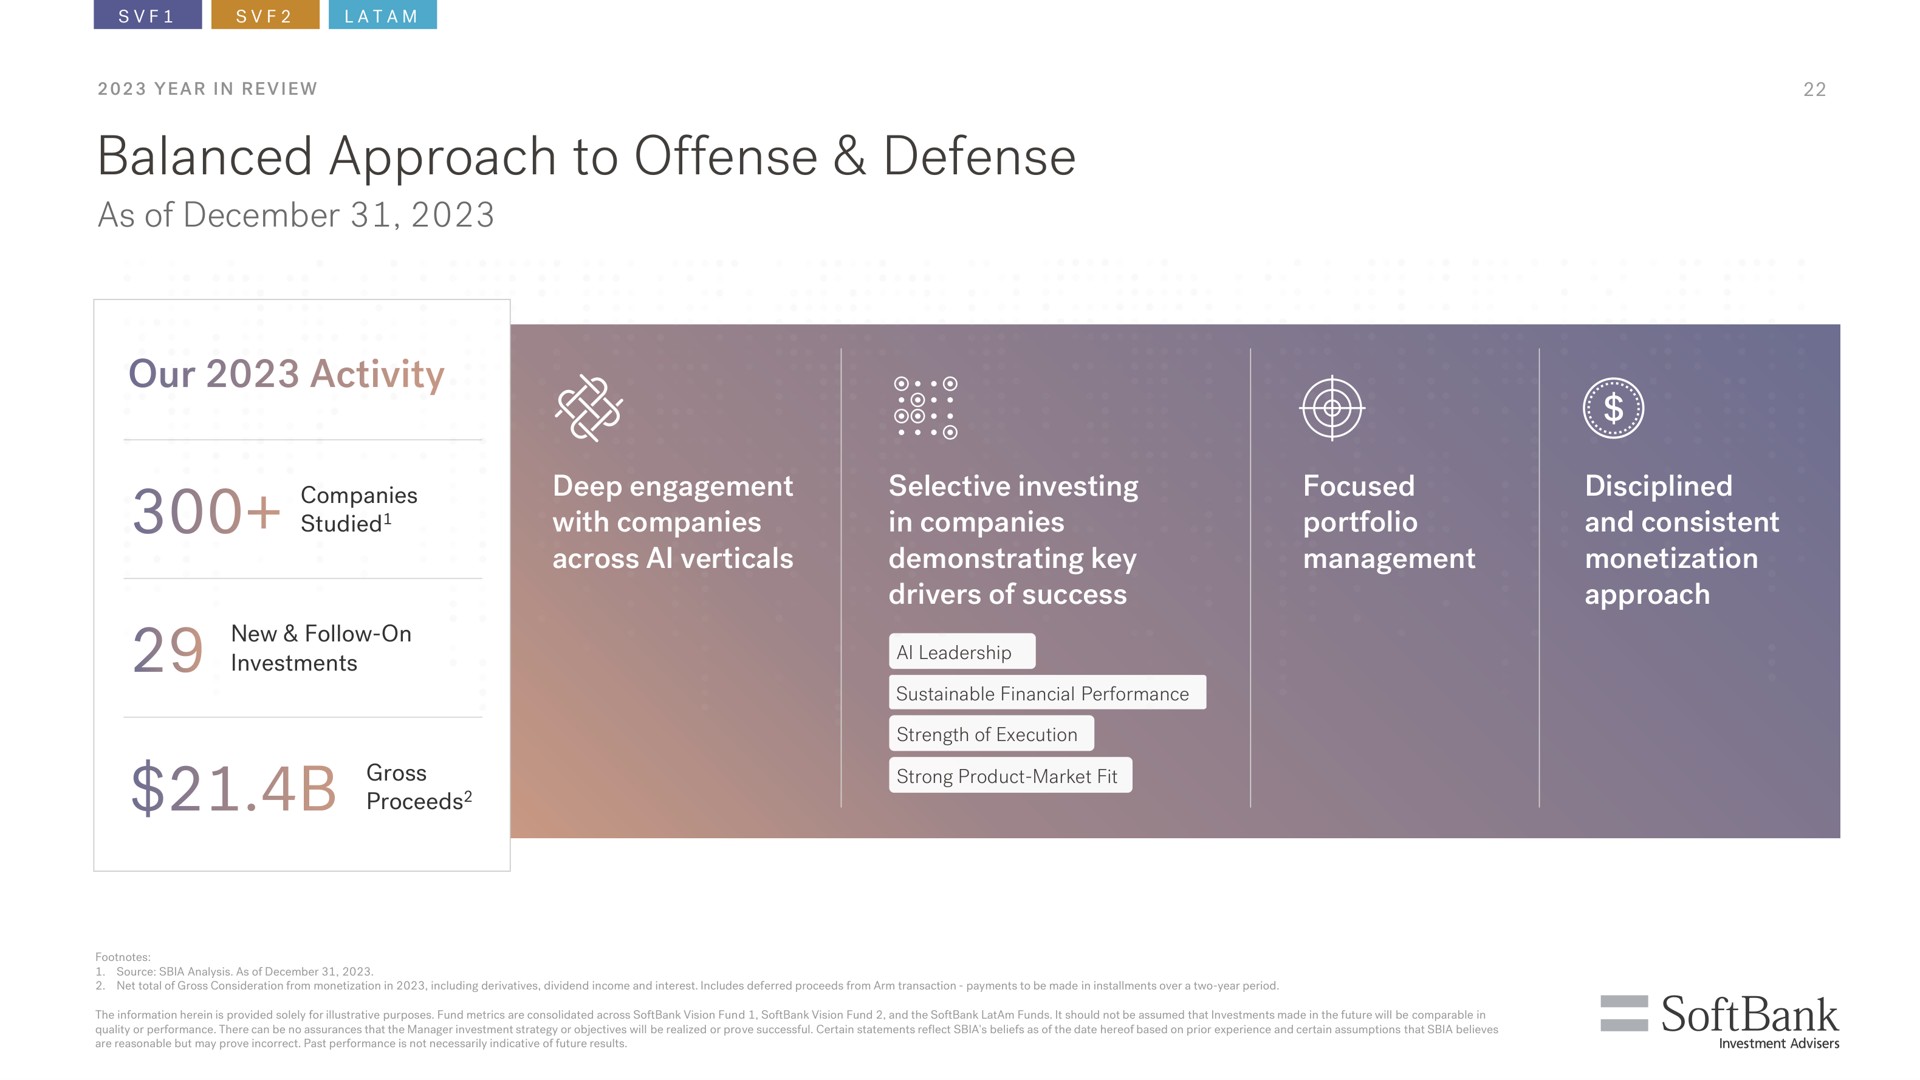 balanced approach to offense defense as of our activity | SoftBank